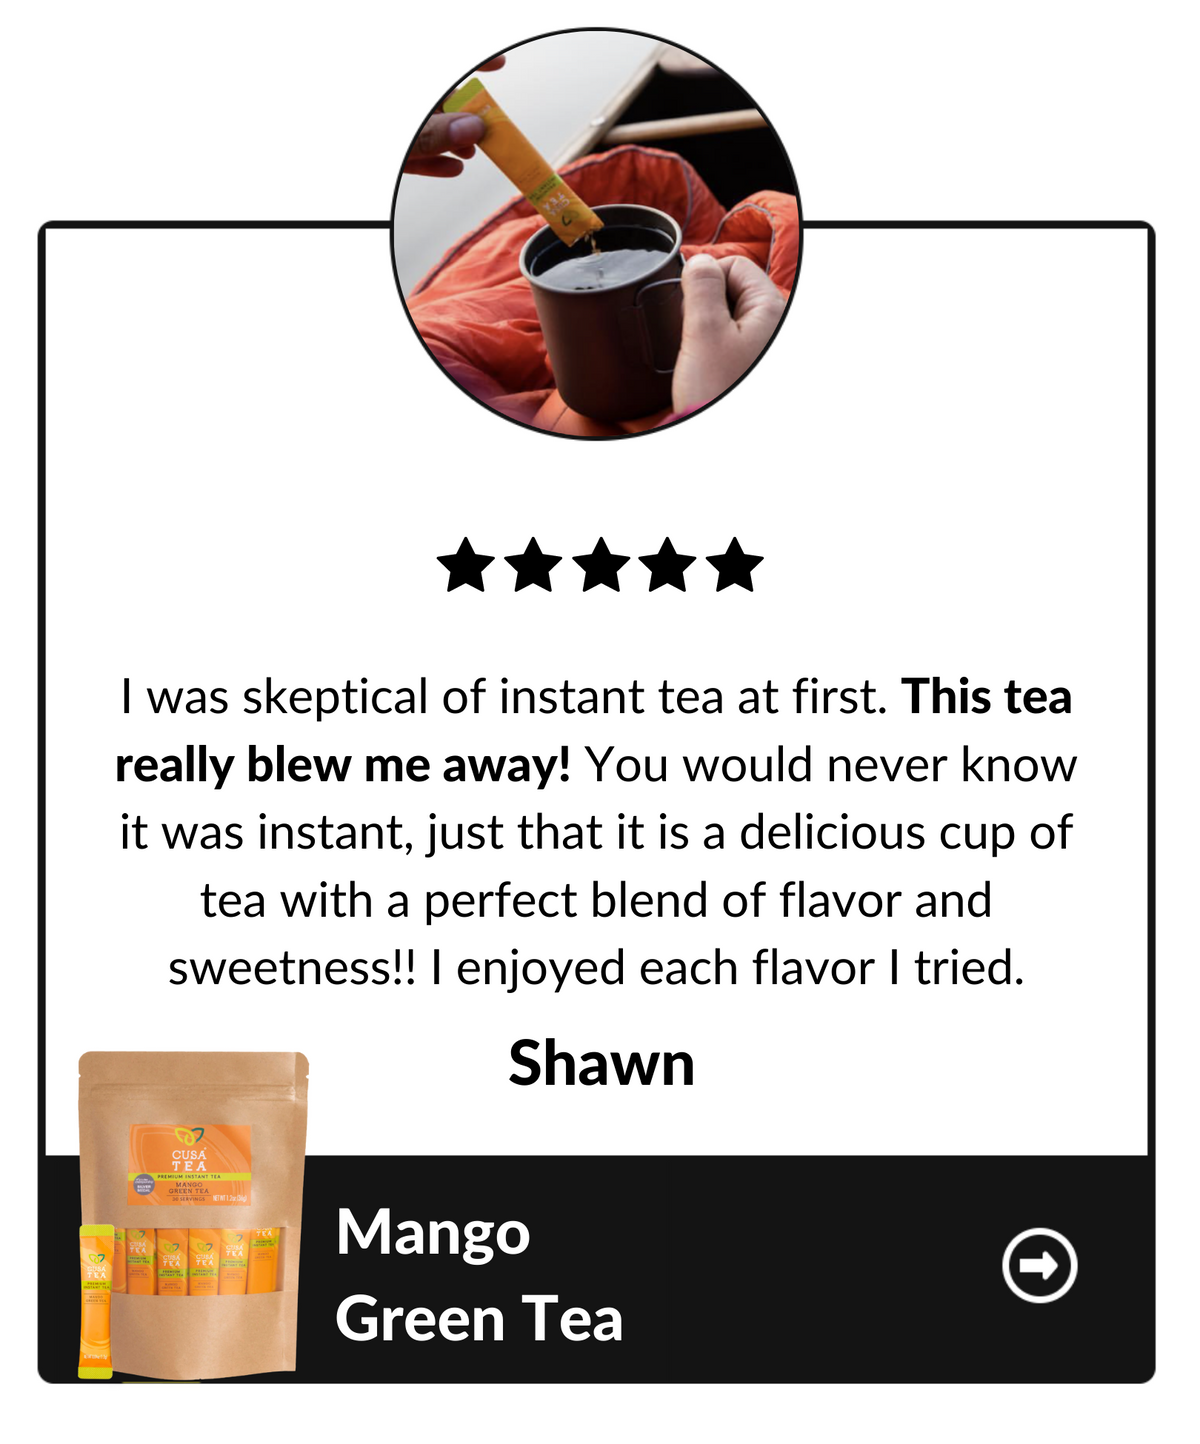 I was skepyical of instant tea at first. This tea really blew me away! You would never know it was instant, just that it is a delicious cup of tea with a perfect blend of flavor and sweetness!! I enjoyed each flavor I tried. Shawn, Mango Green Tea testimonial